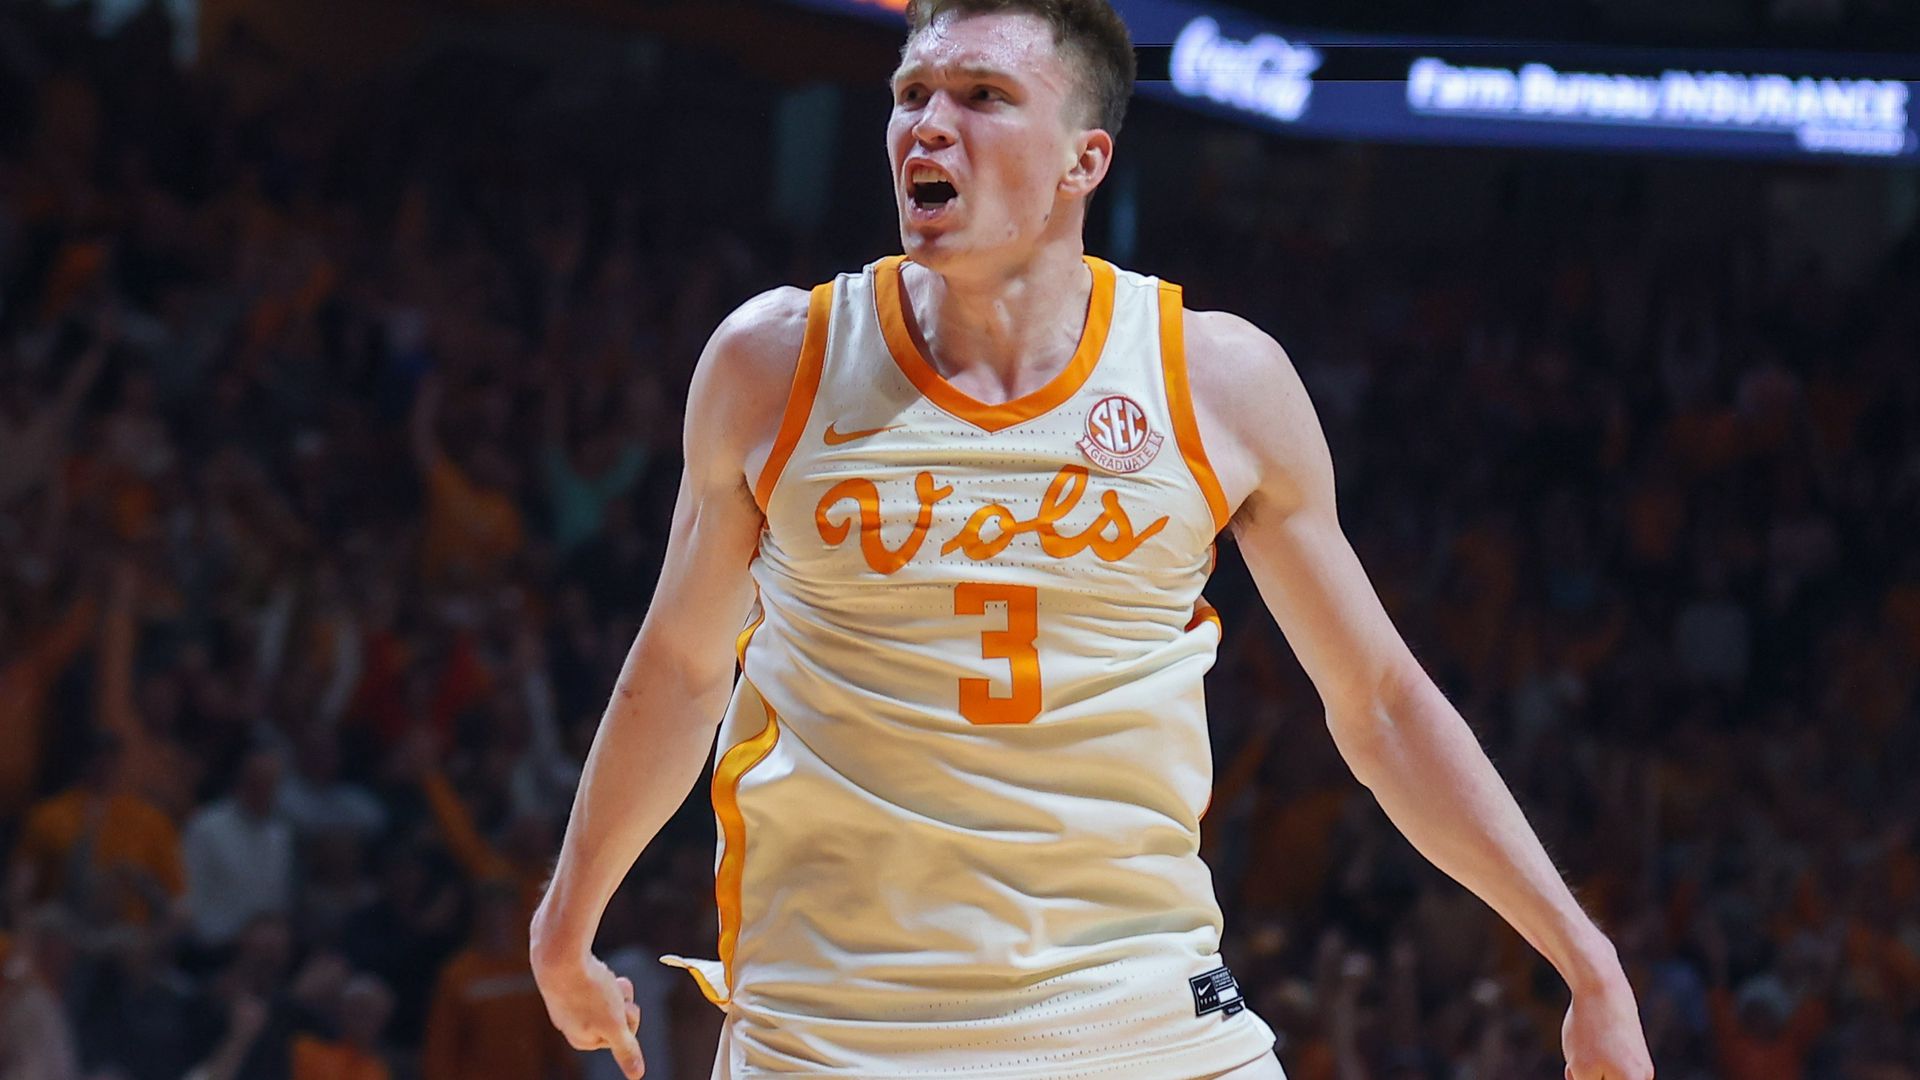 3 takeaways from tennessee’s win over auburn